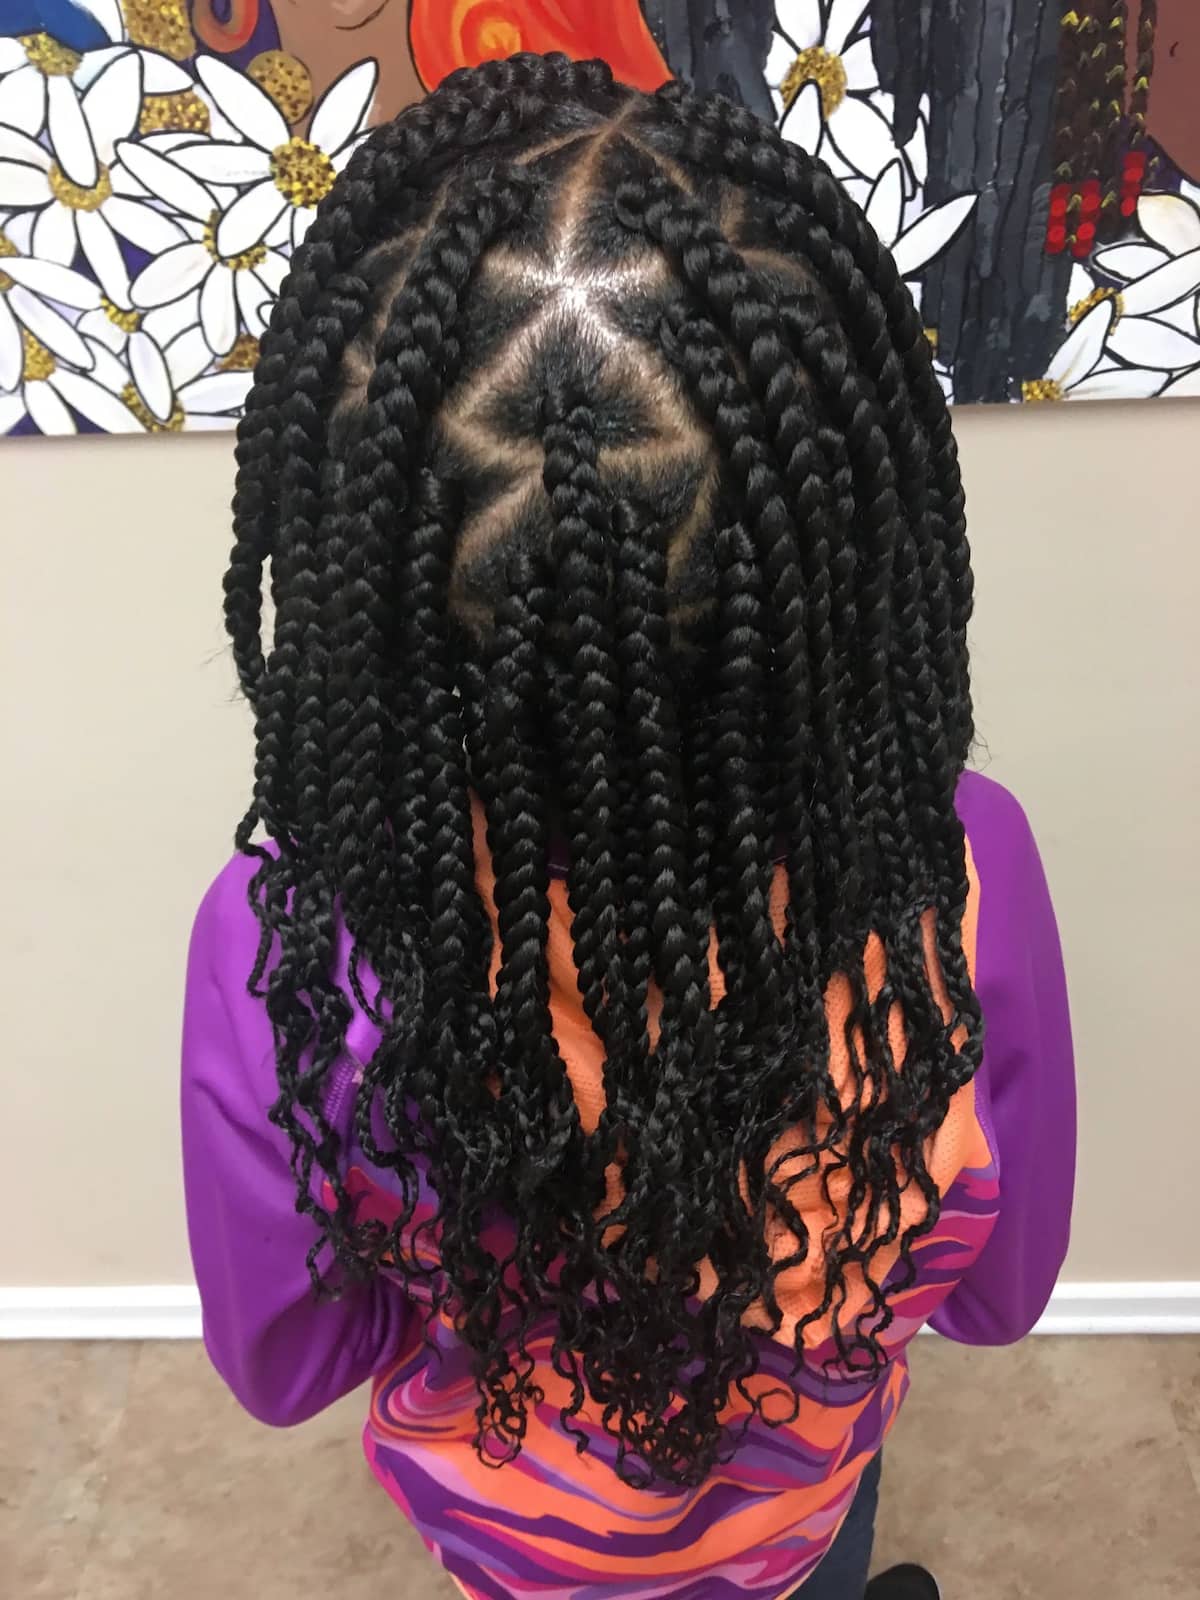 individual braids styles for kids